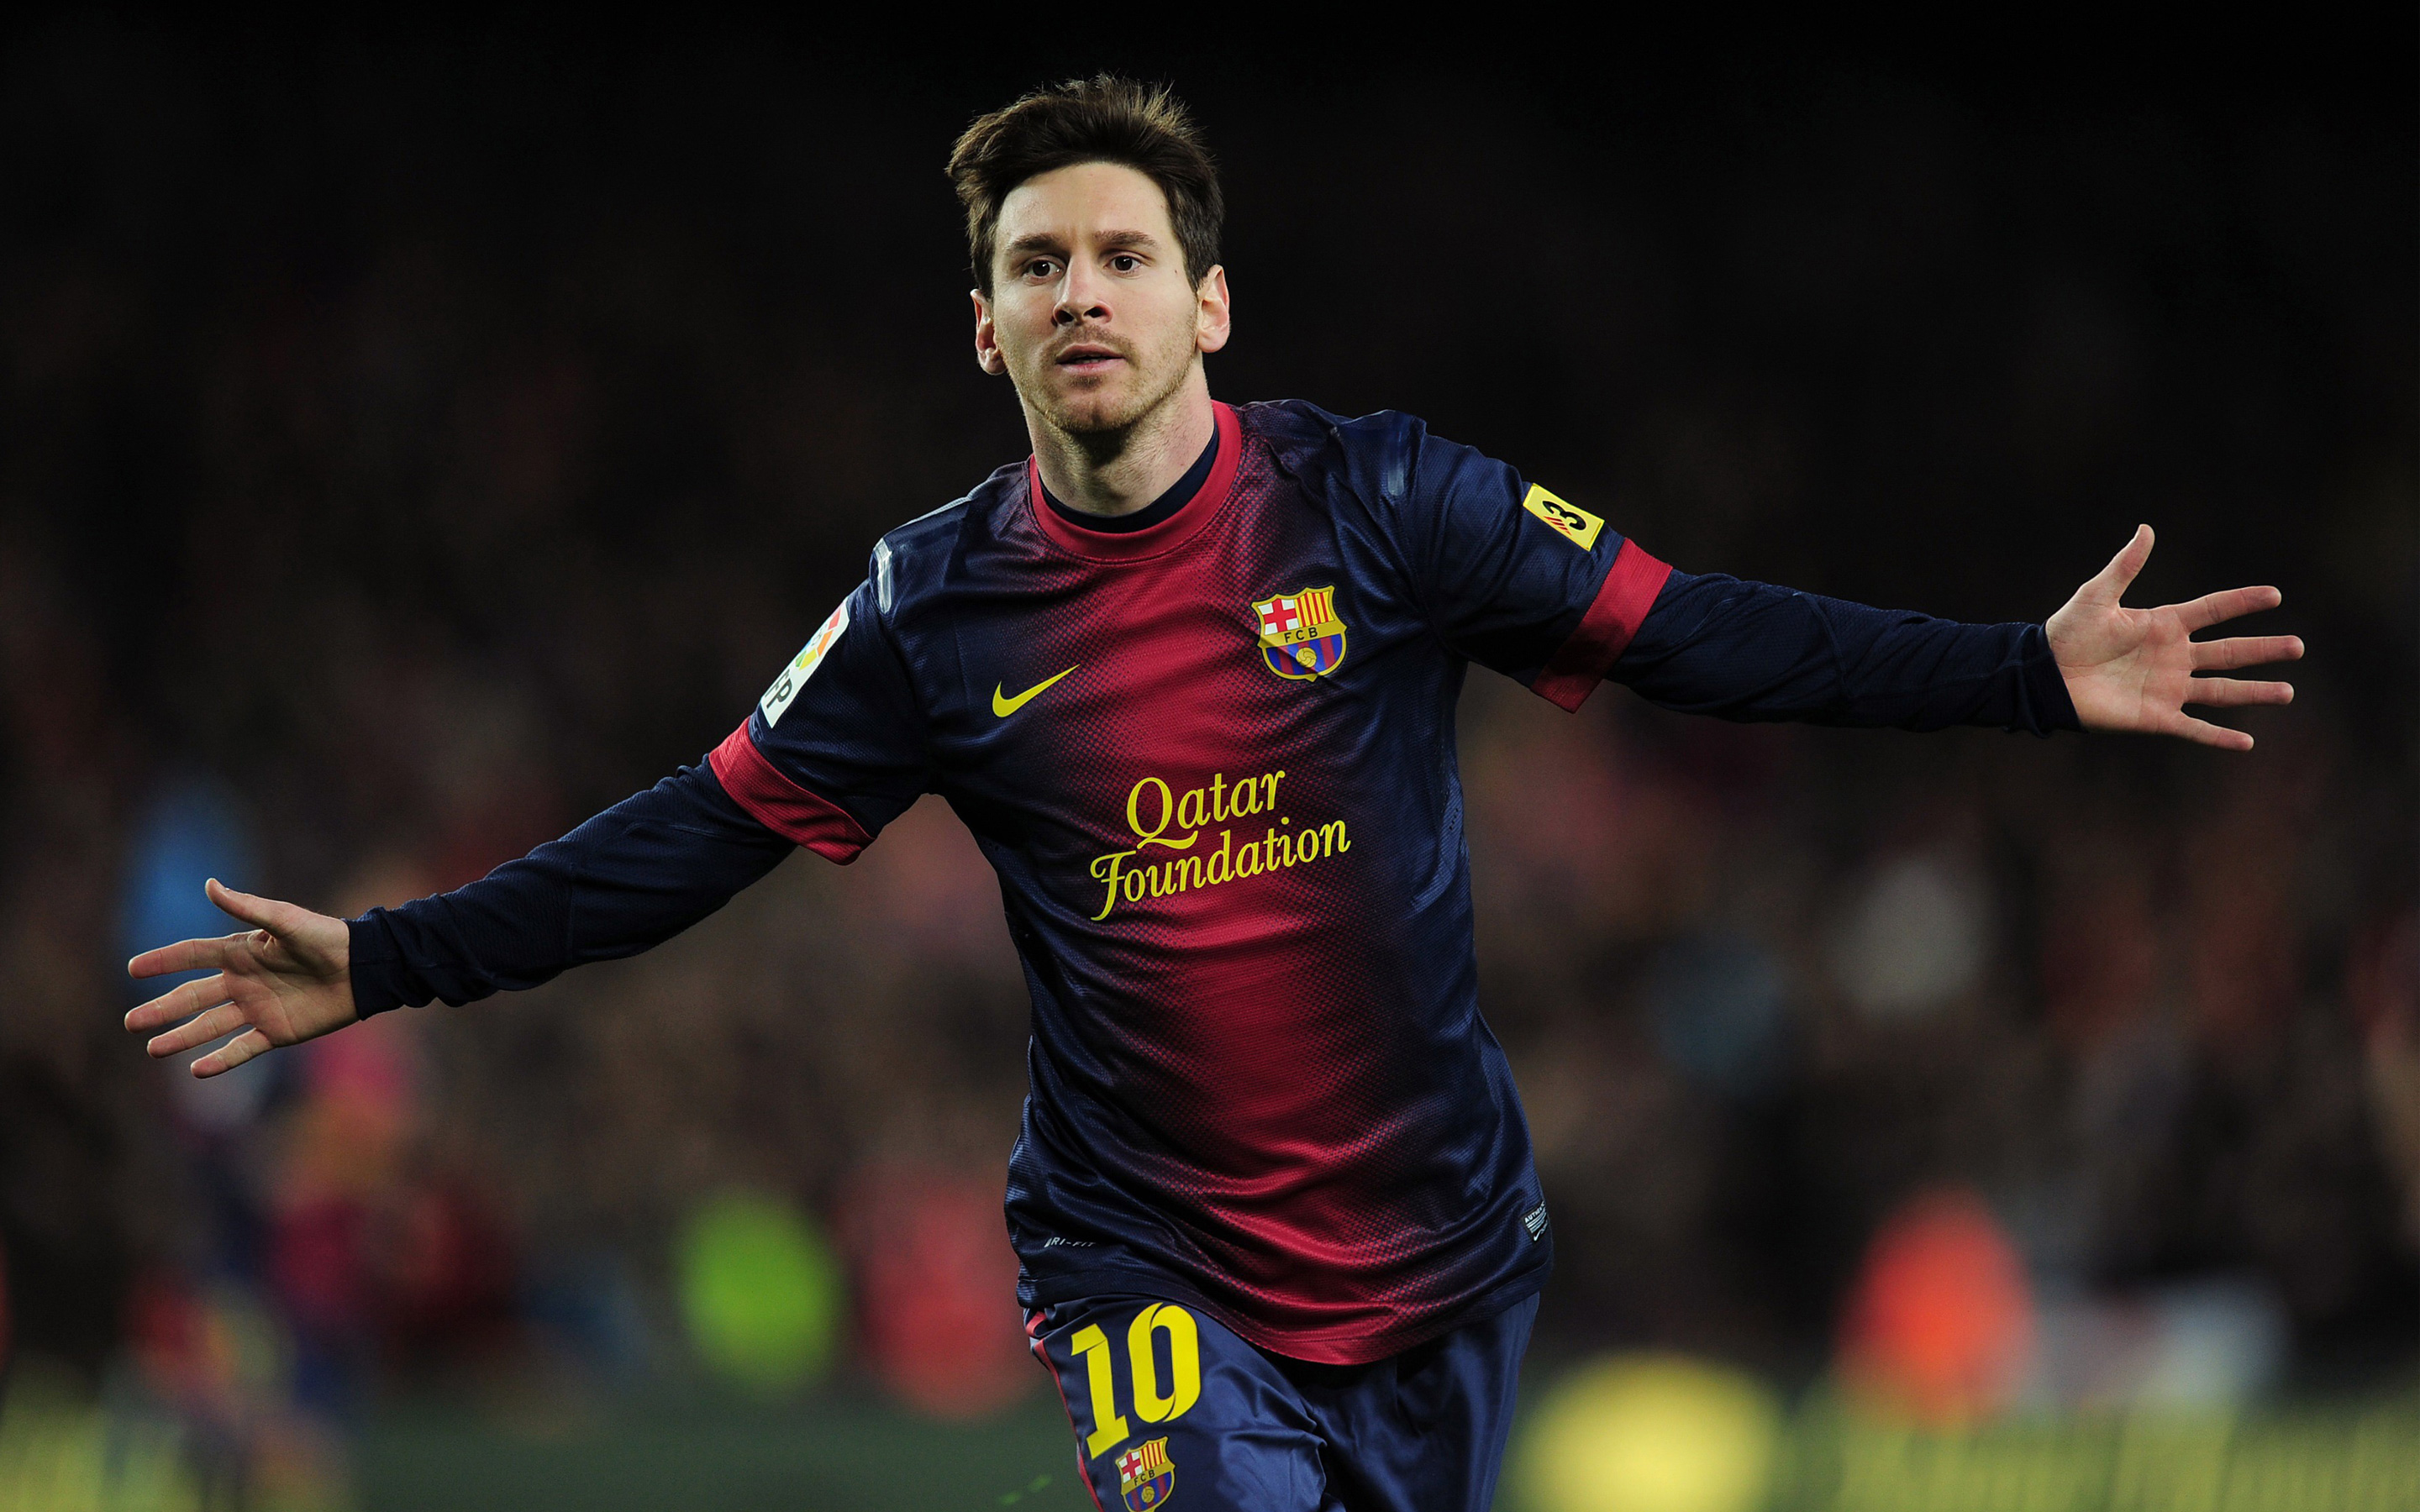 Messi 4K wallpaper for your desktop or mobile screen free and easy to download